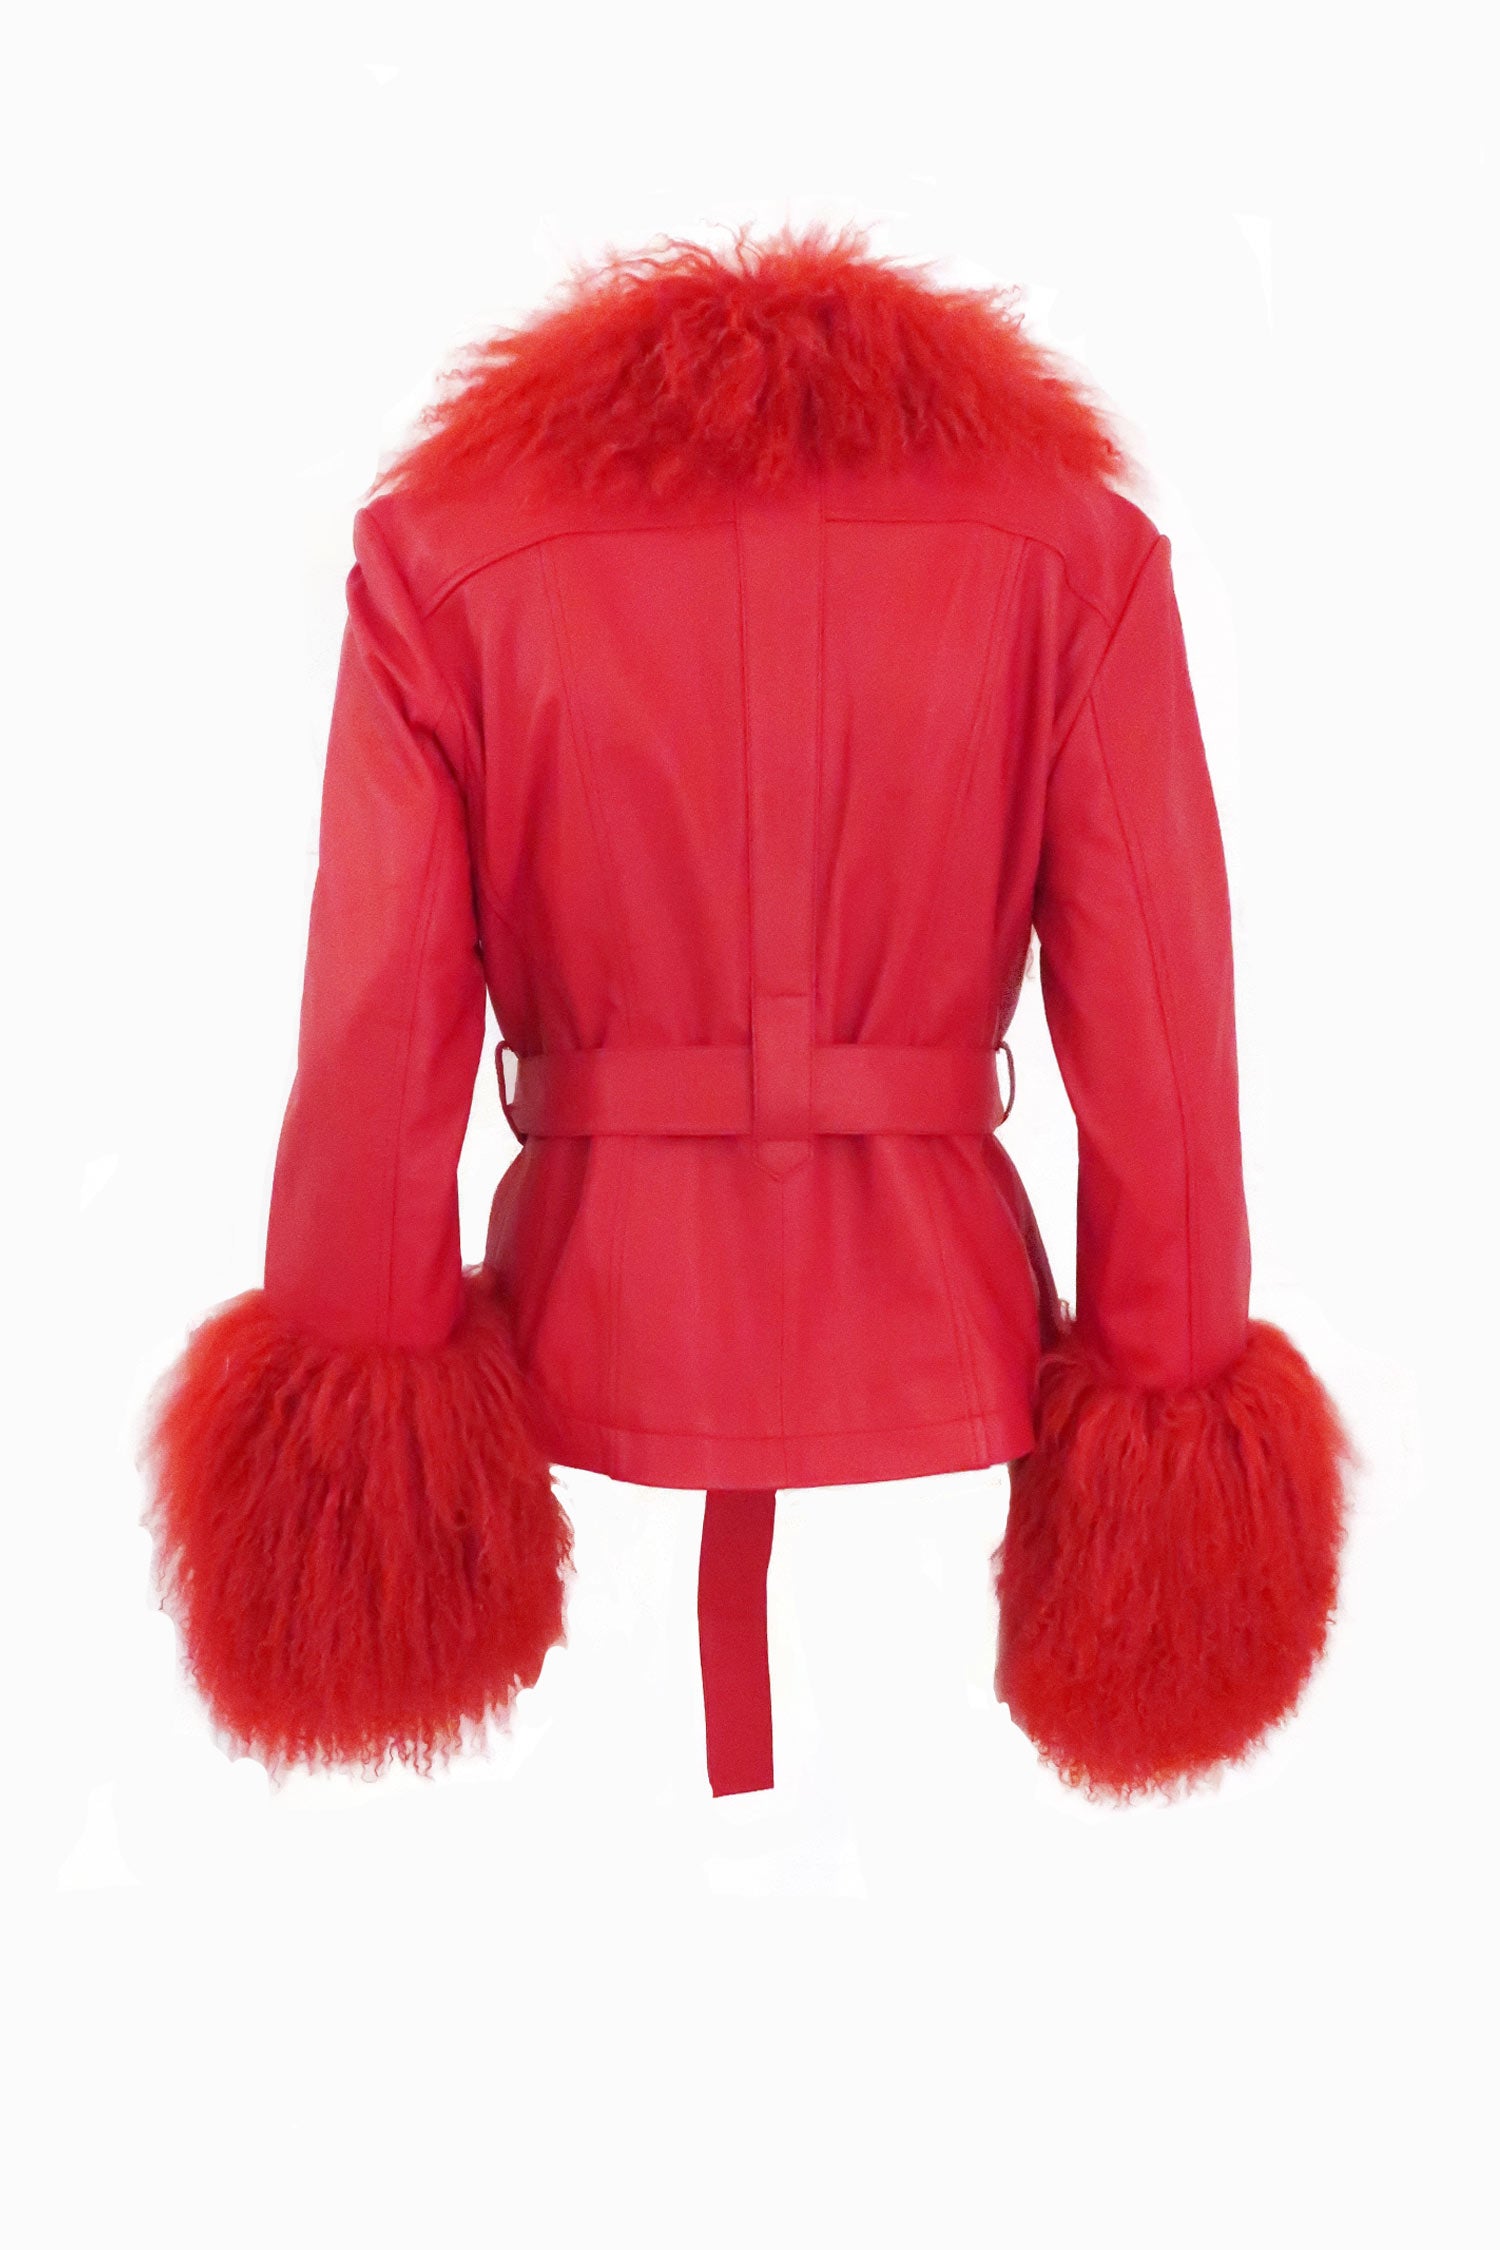 East End Leather Shearling Jacket in Ruby - Mode & Affaire